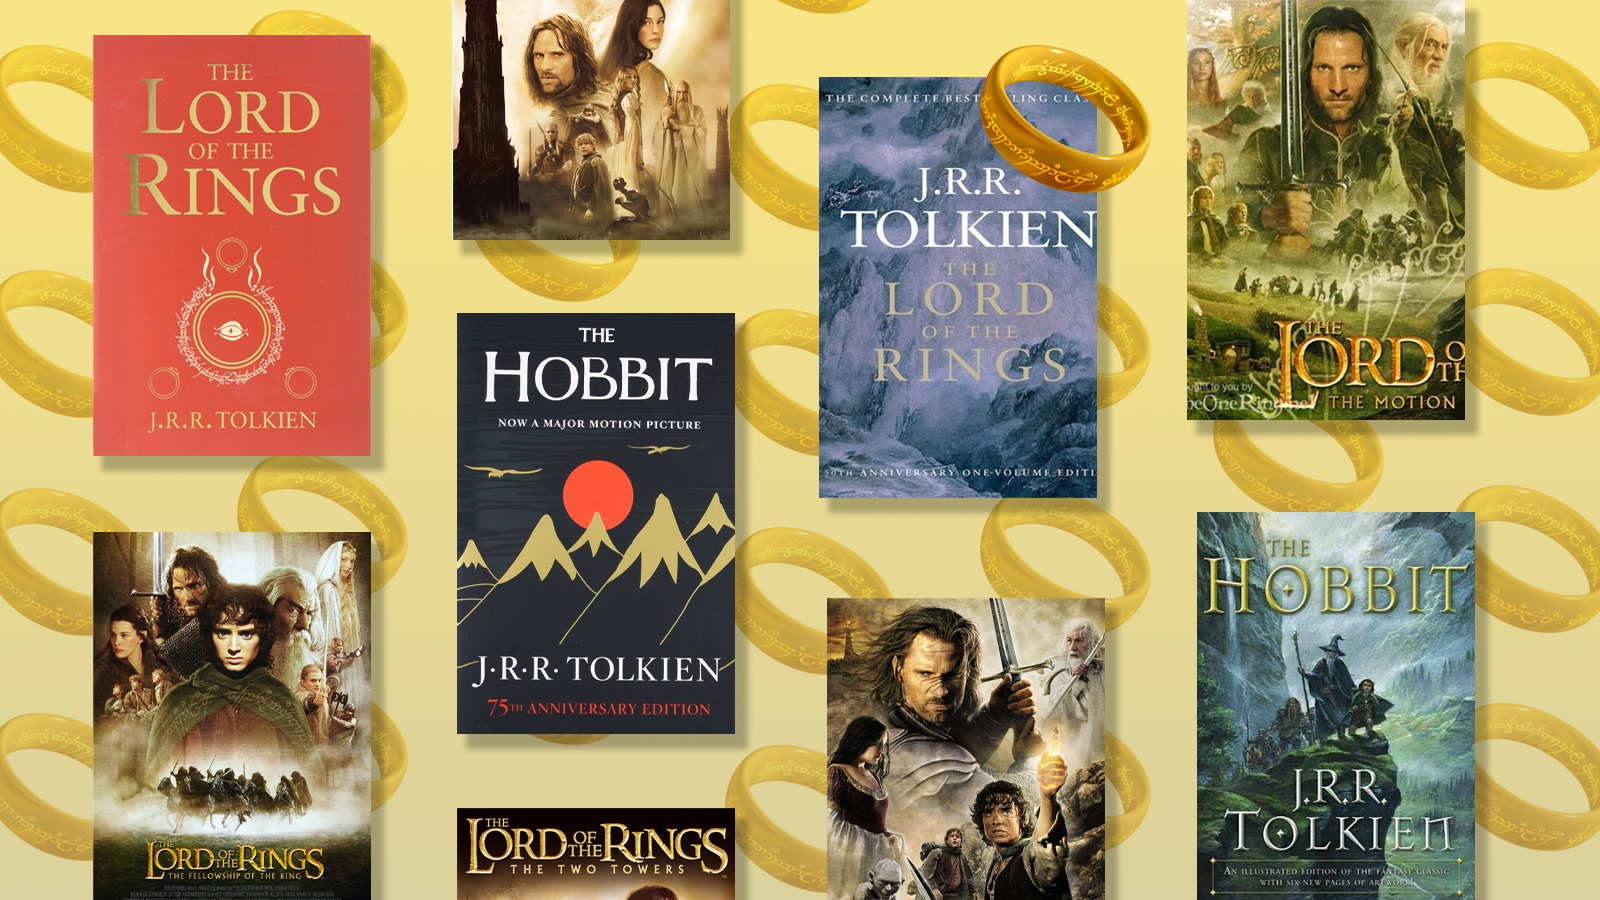 lord of the rings characters list Book Covers